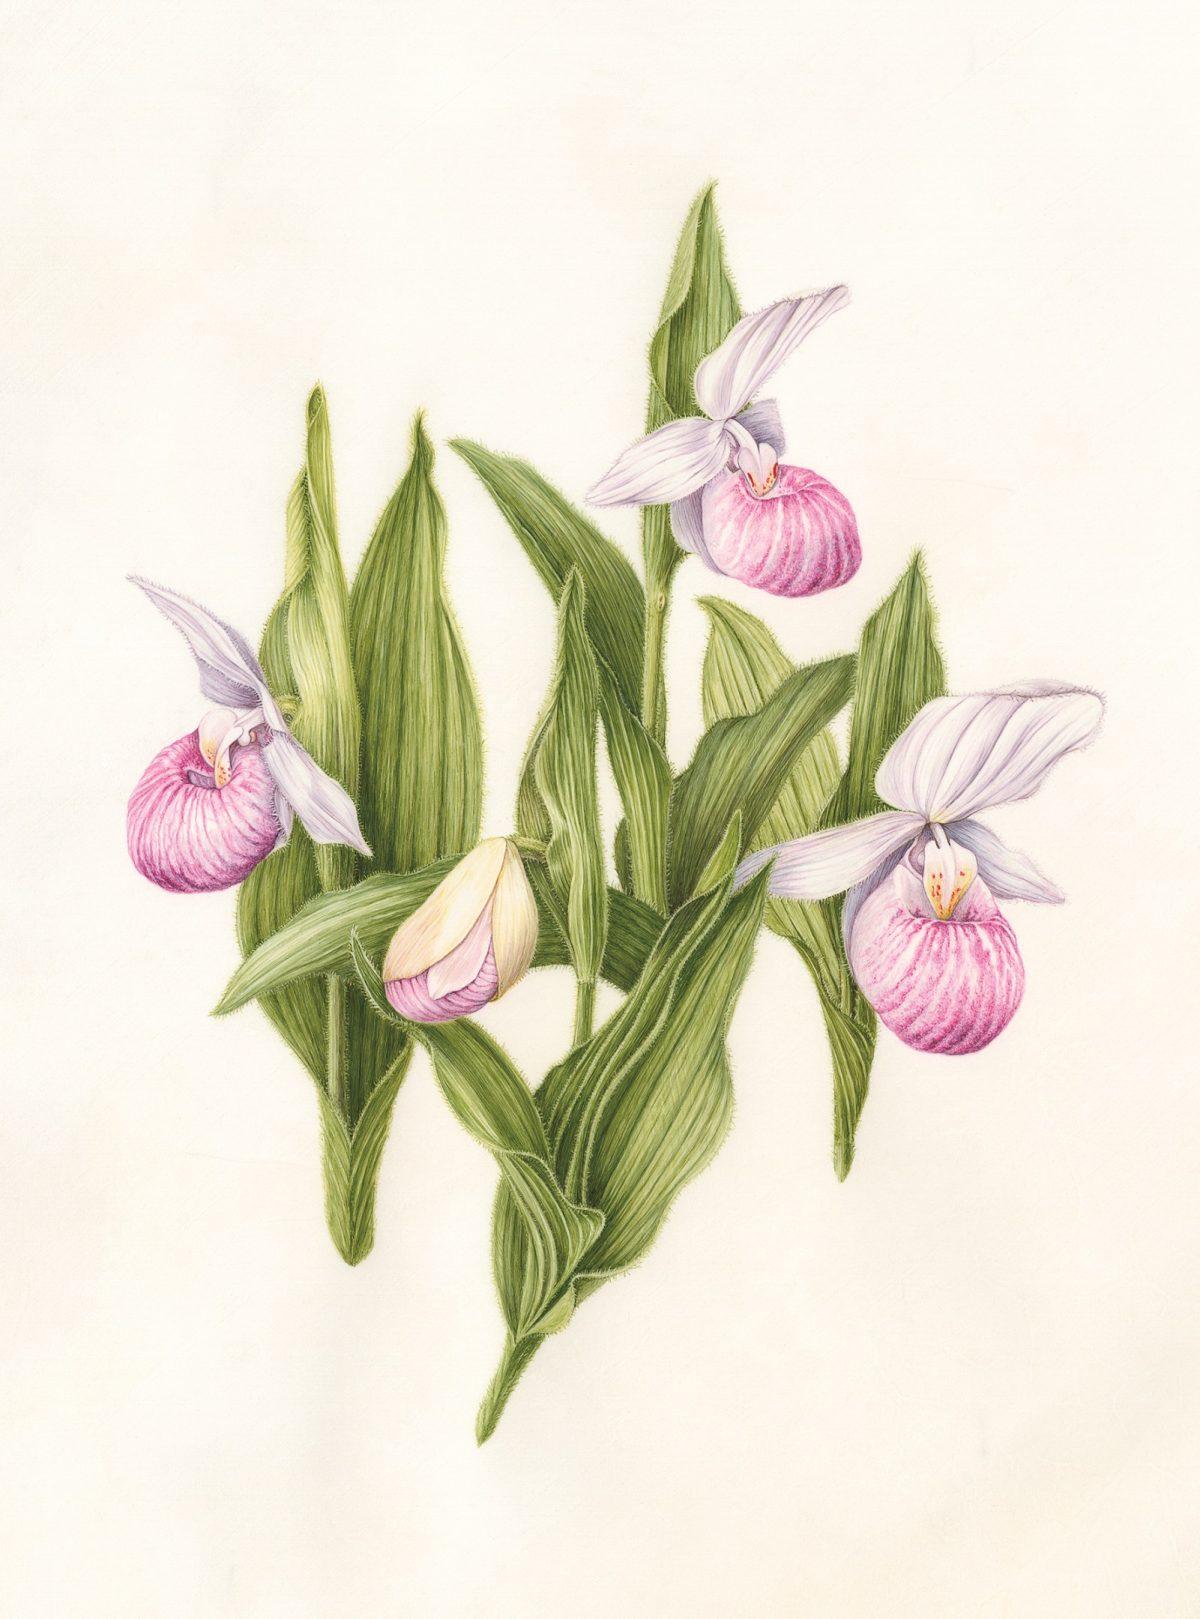 “Showy Lady’s Slipper (Cypripedium reginae),” 2017, by Linda Powers. Watercolor on vellum, 13 1/2 inches by 10 1/2 inches. (Linda Powers)